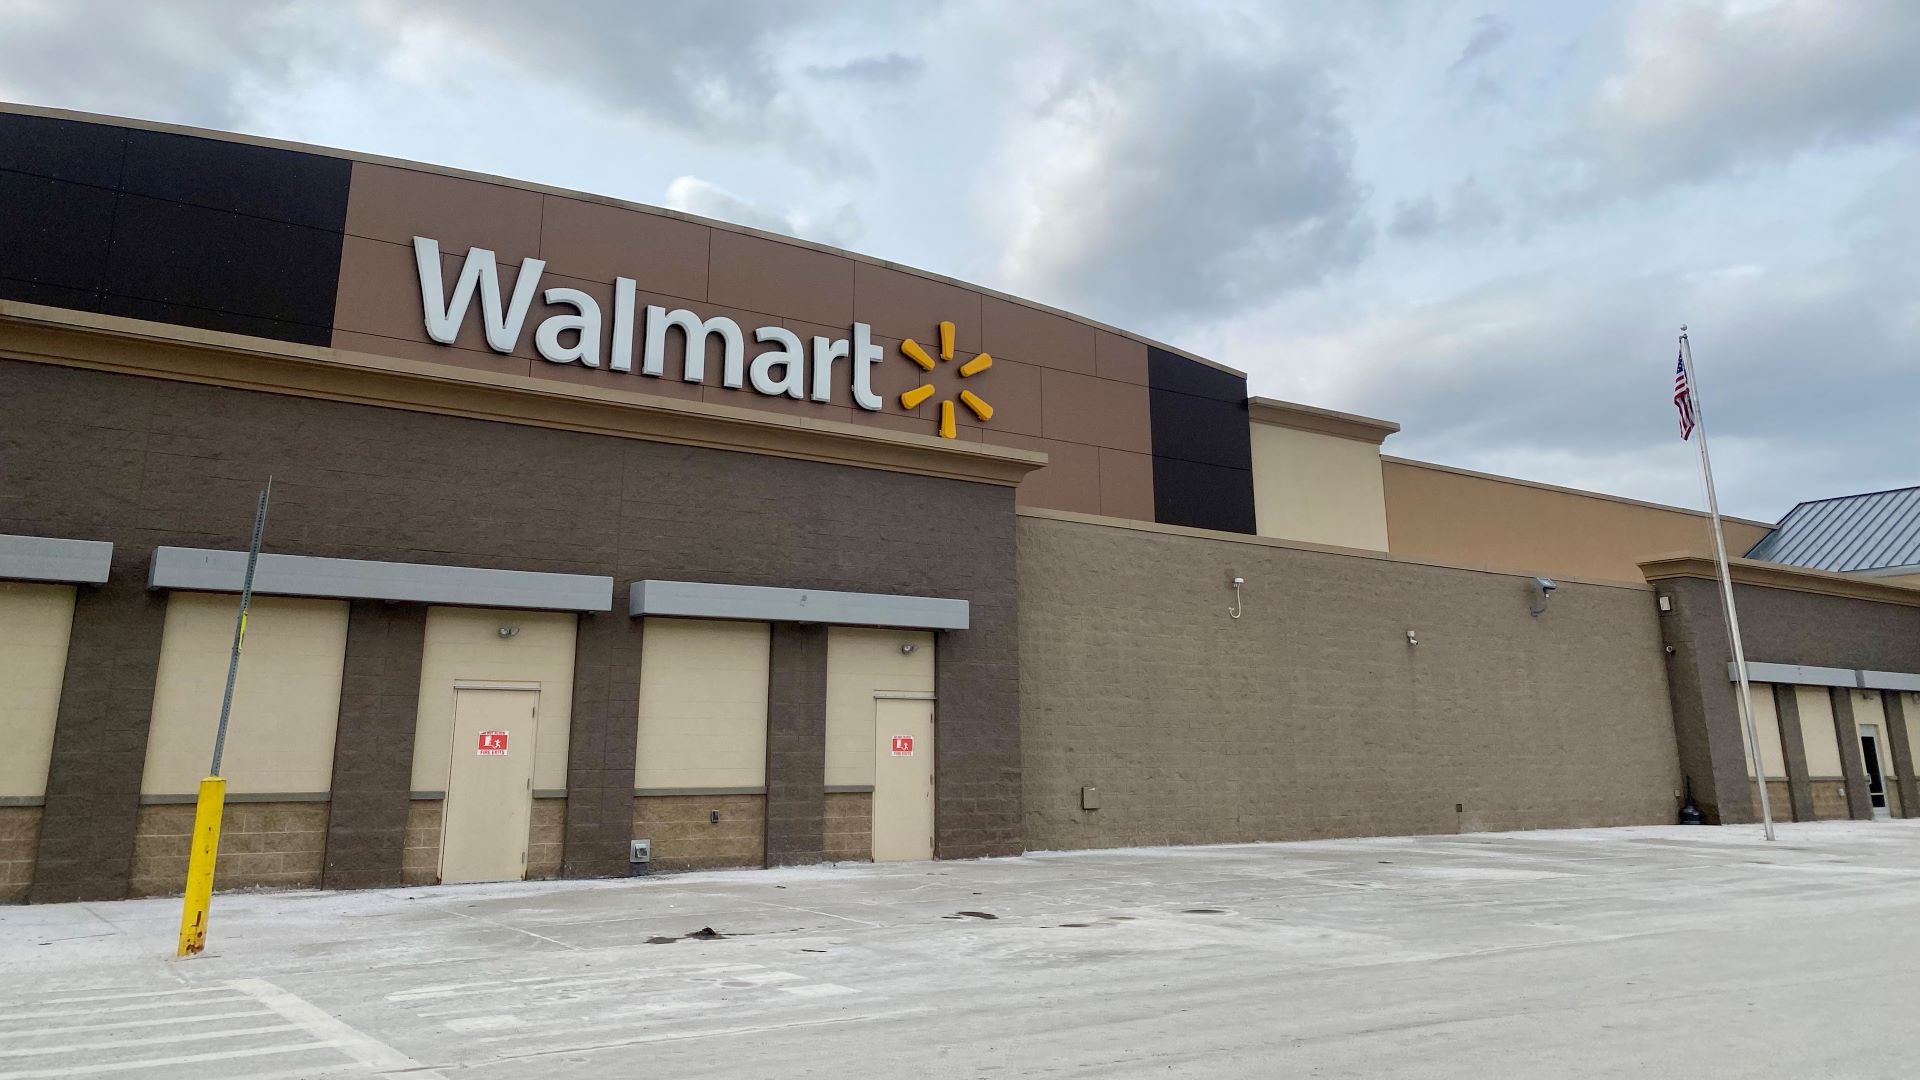 Walmart weighs options as state board denies “dark store” tax appeal in Thomaston